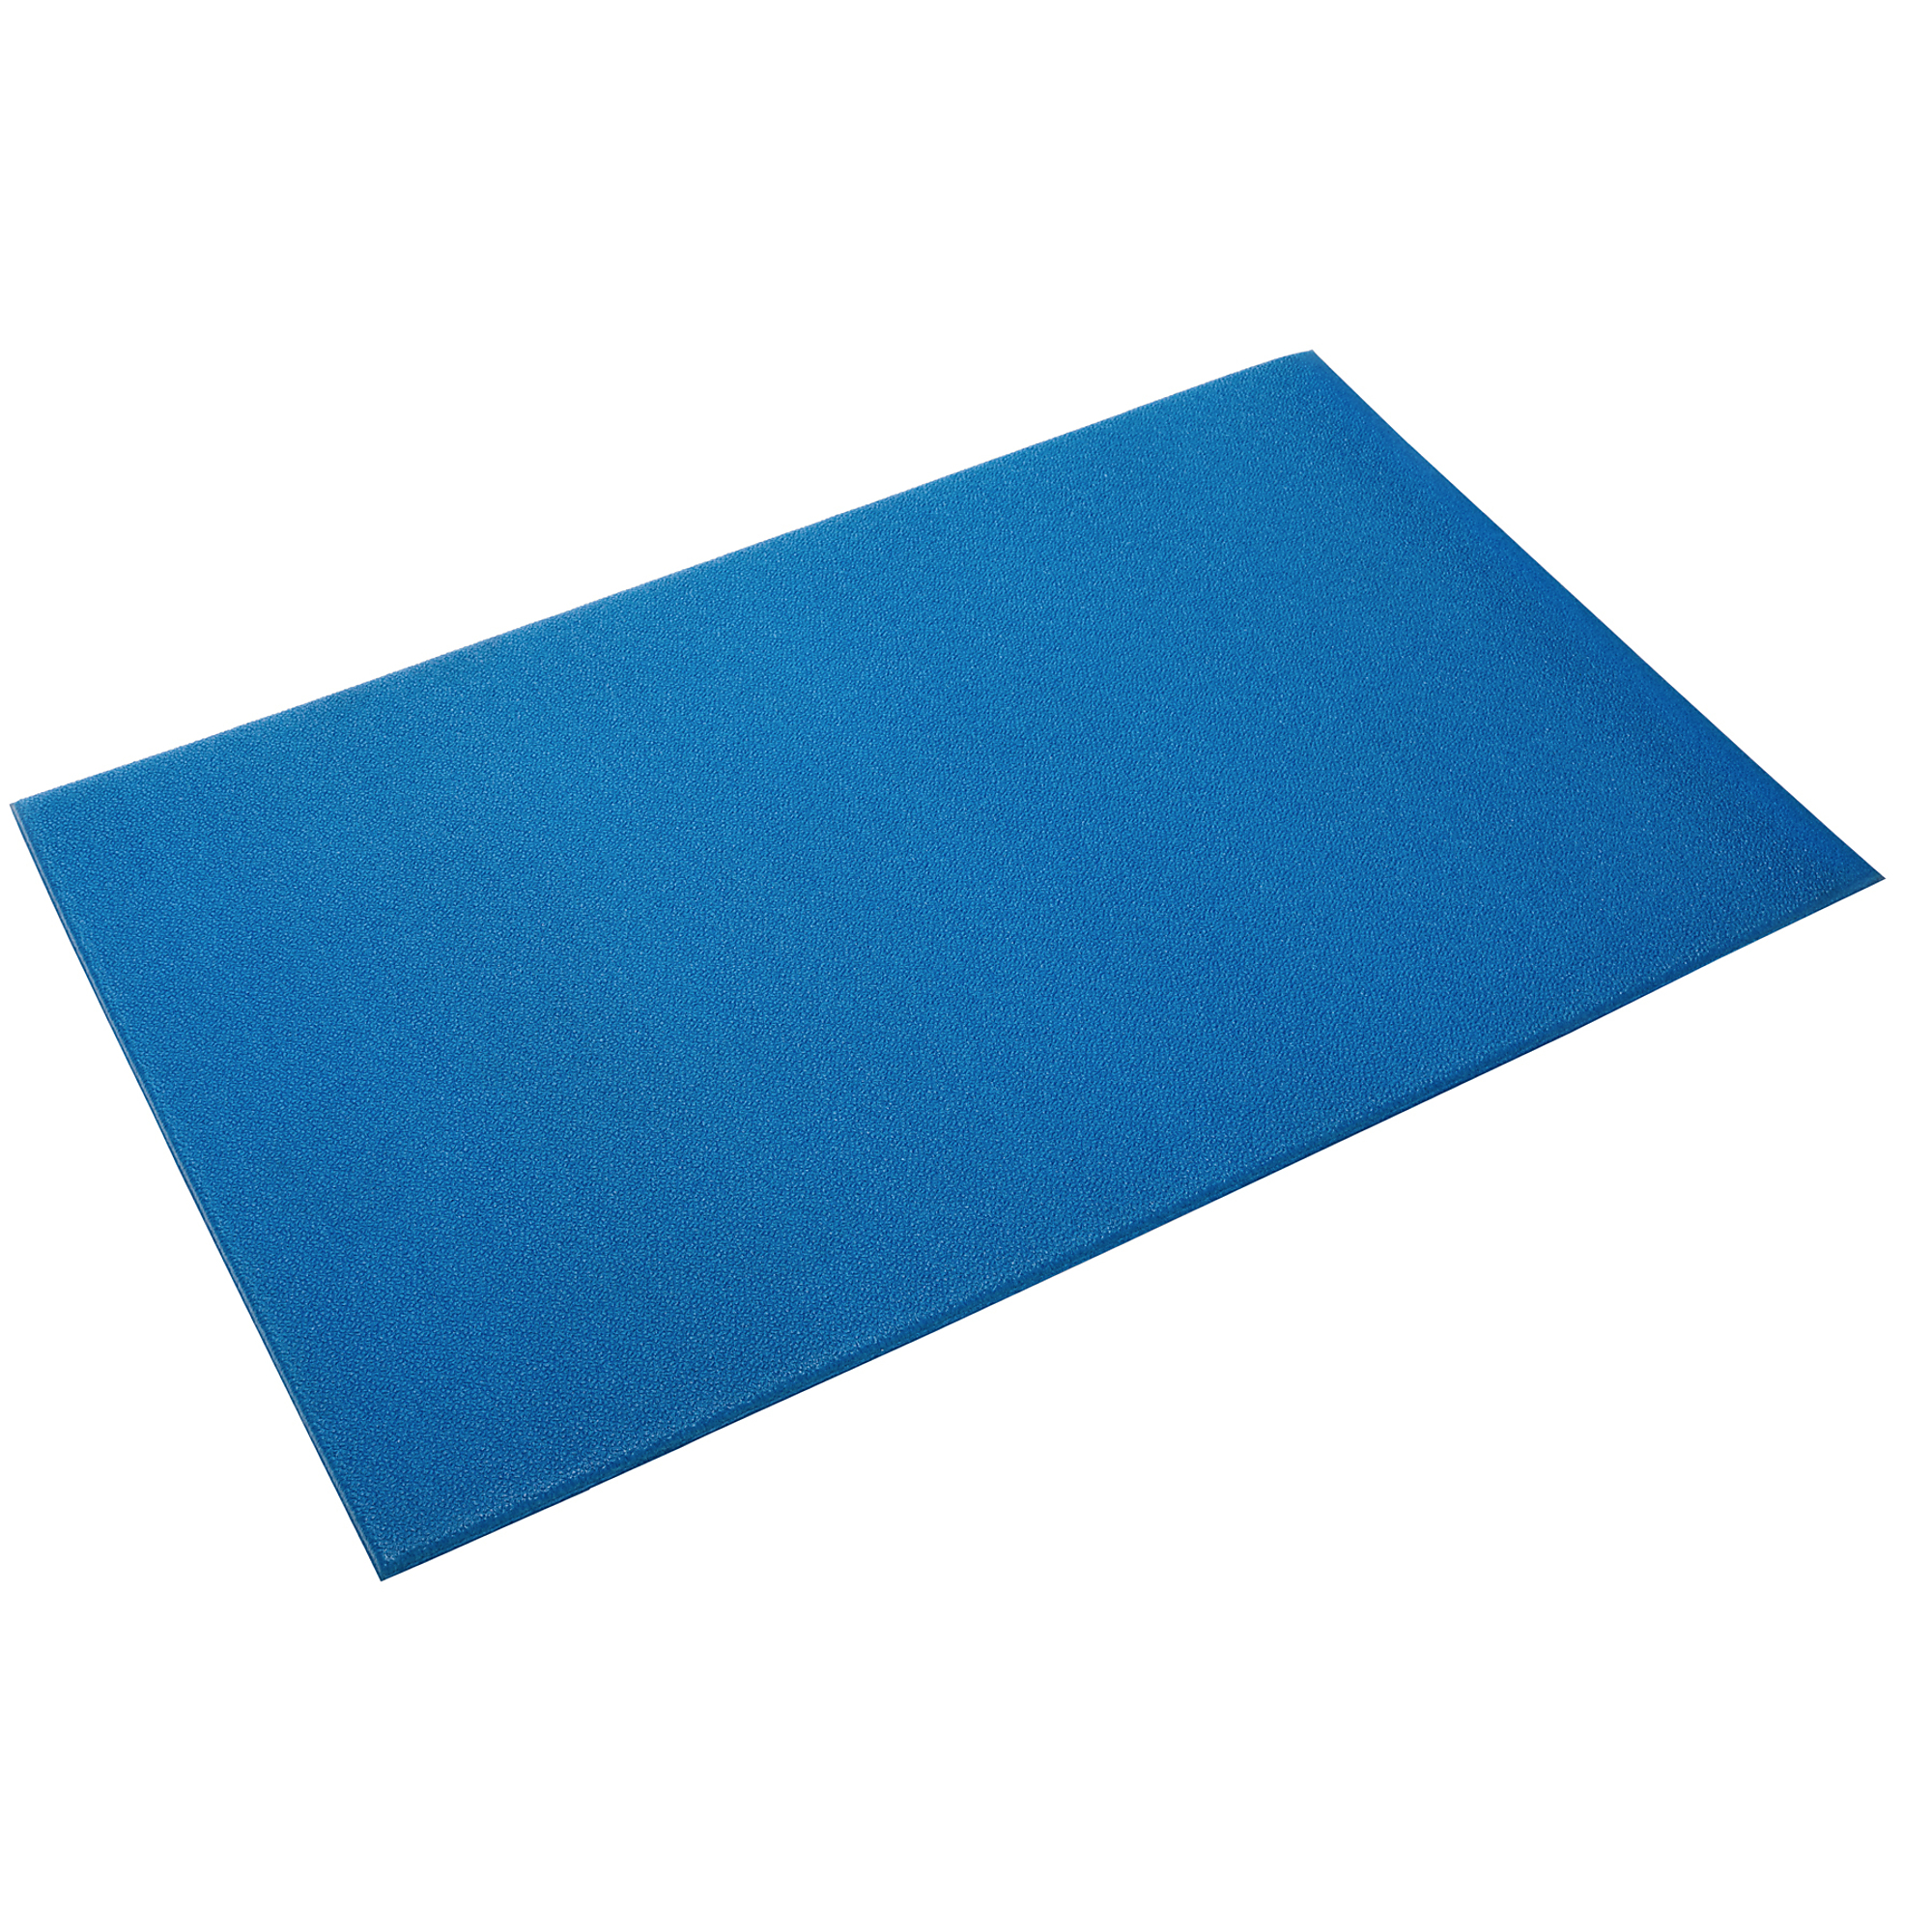 Crown Matting Technologies, Comfort-King 1/2 2ft.x3ft. Royal Blue, Width 24 in, Length 36 in, Thickness 1/2 in, Model K4 0023BL